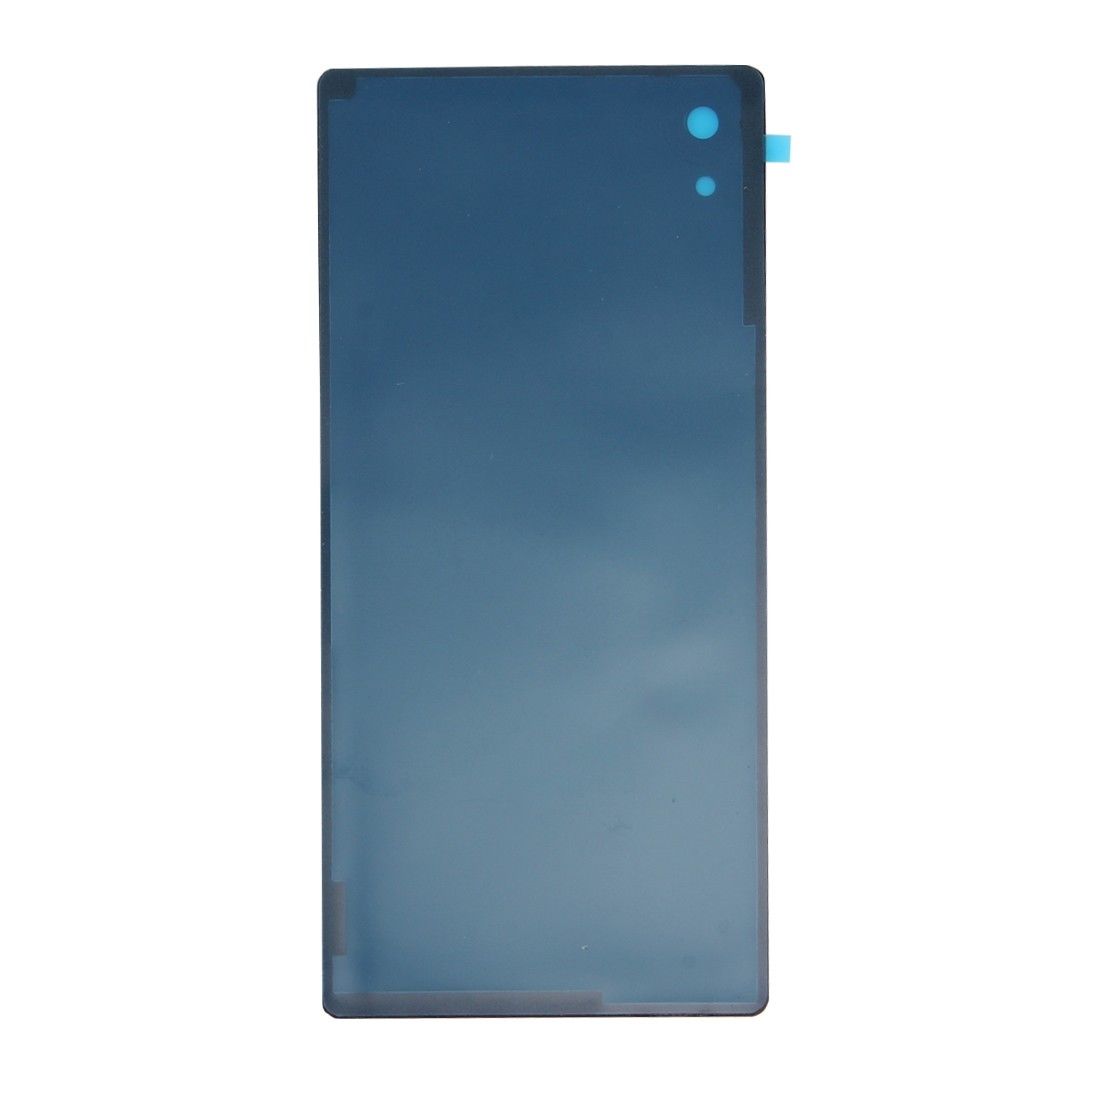 Sony Xperia M4 Aqua Battery Cover Rear Panel Black for [product_price] - First Help Tech